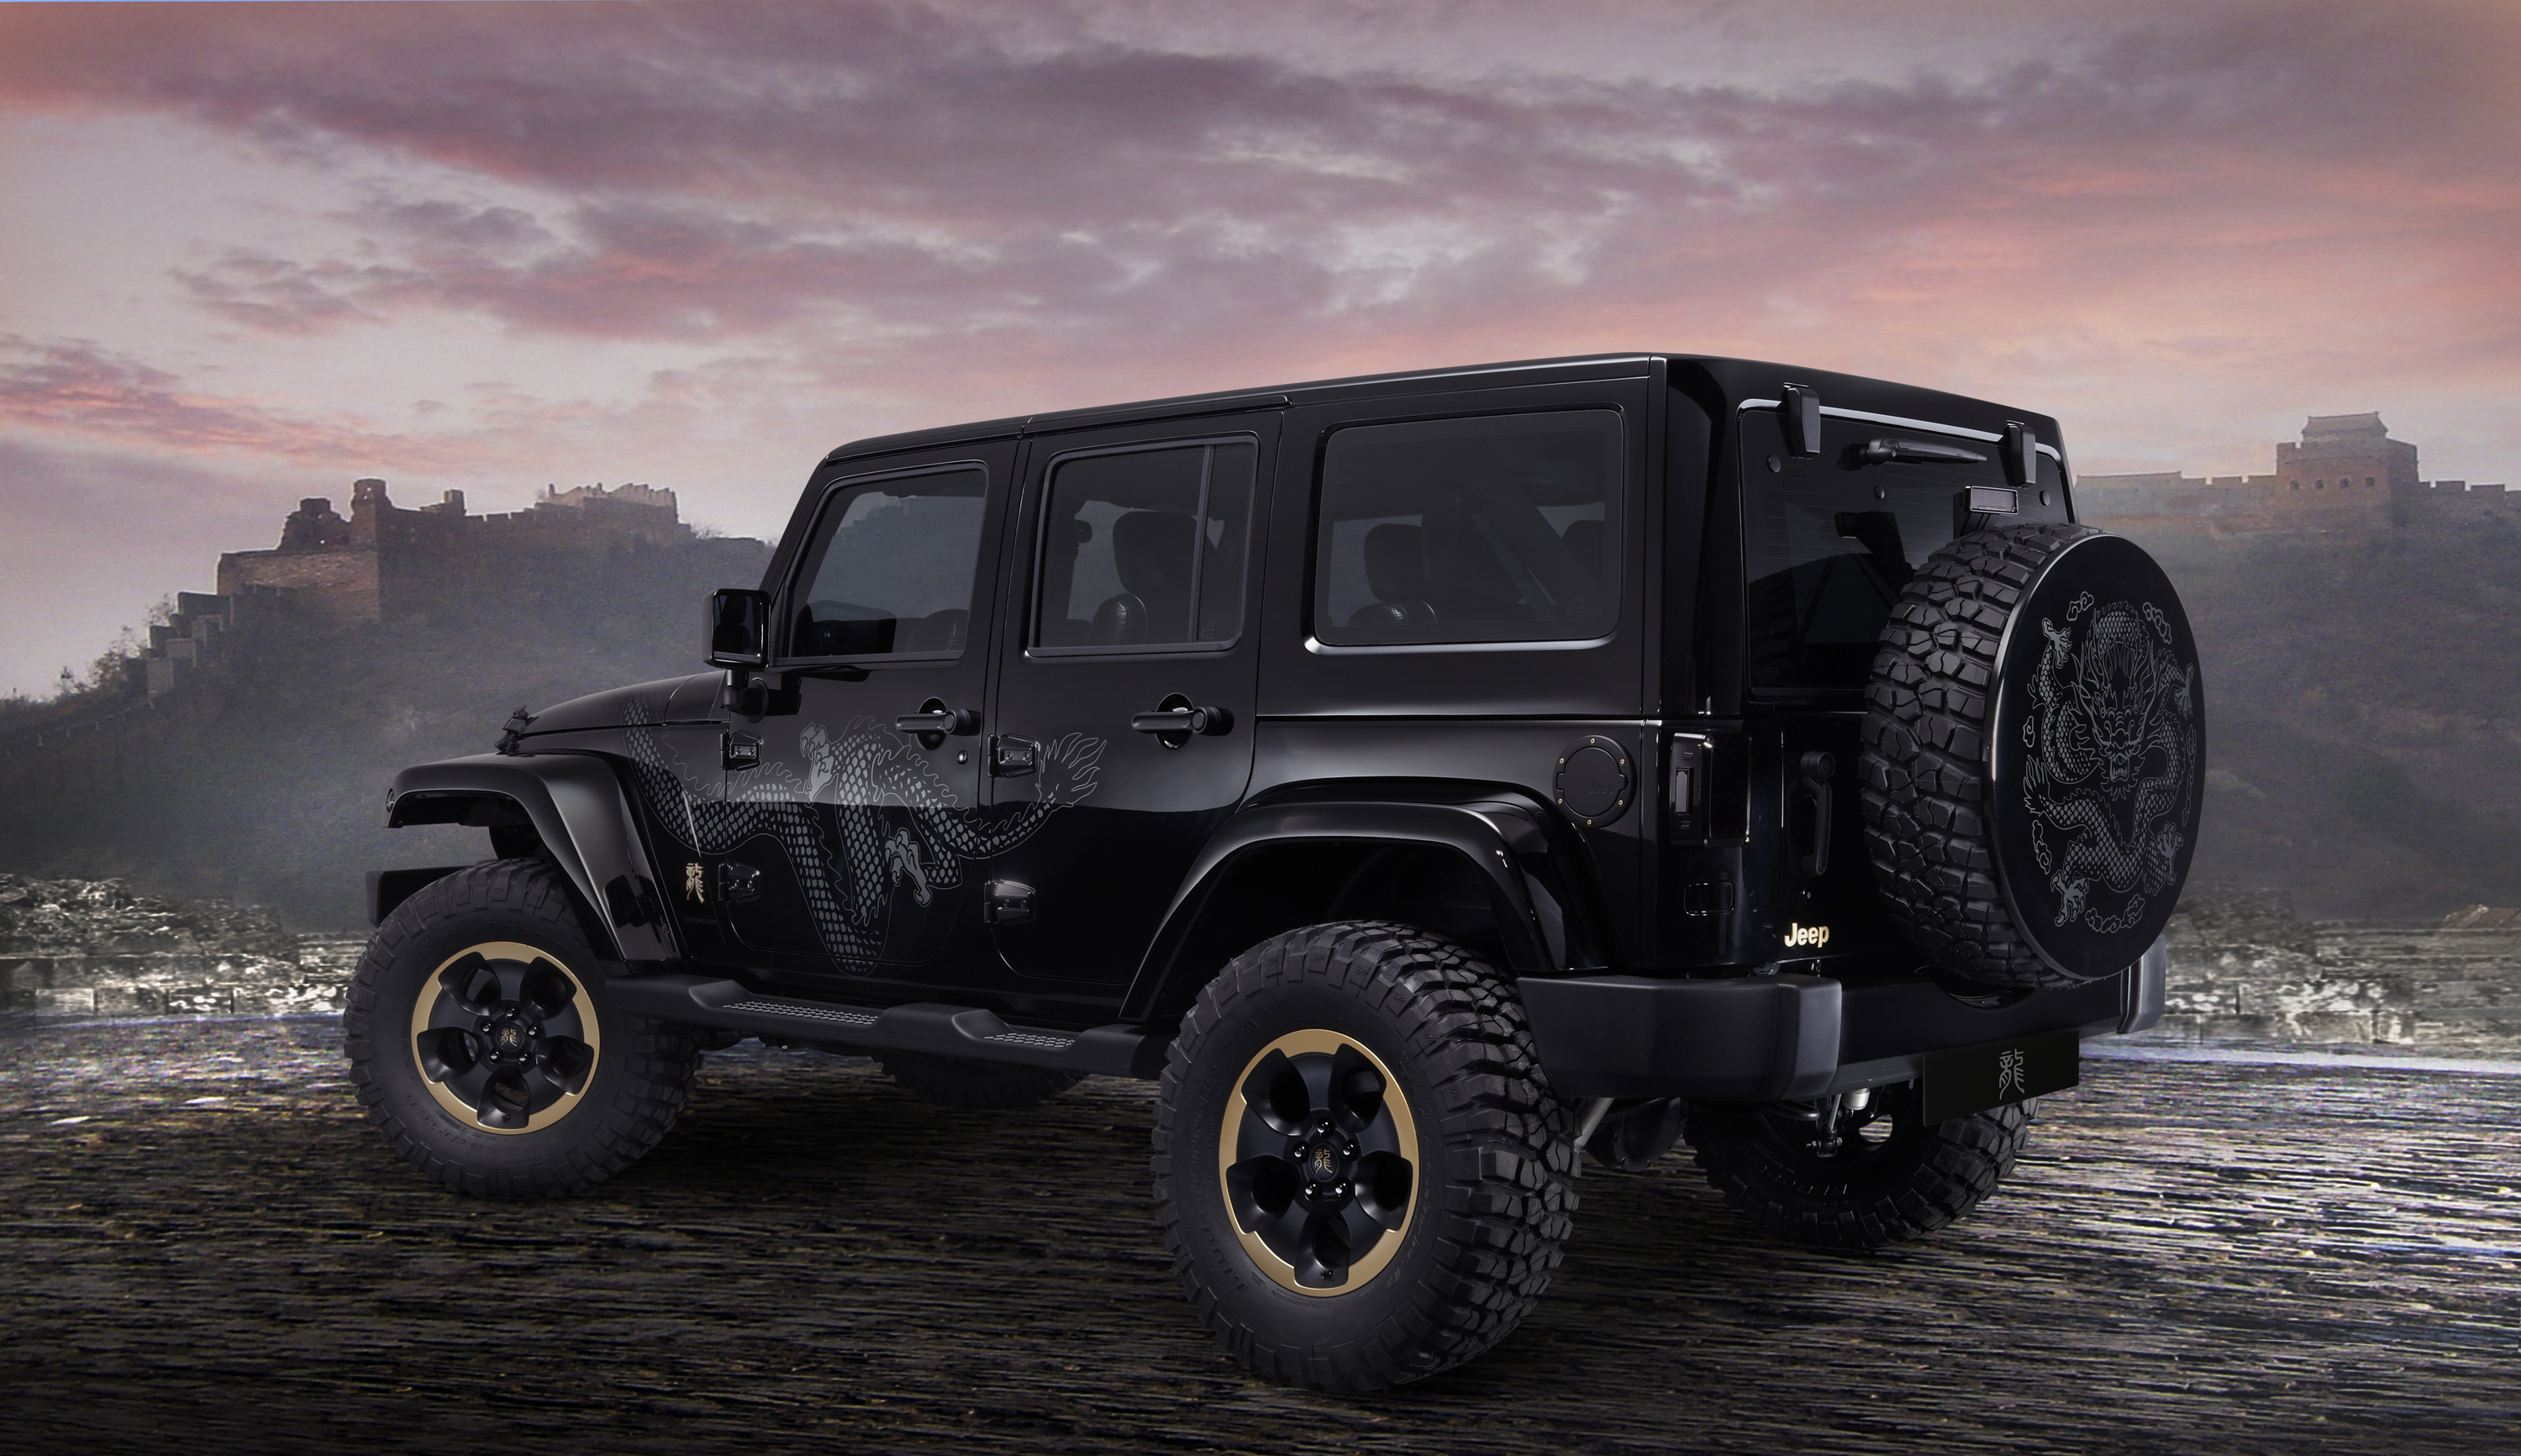 Jeep Wrangler 4k, HD Cars, 4k Wallpapers, Images, Backgrounds, Photos